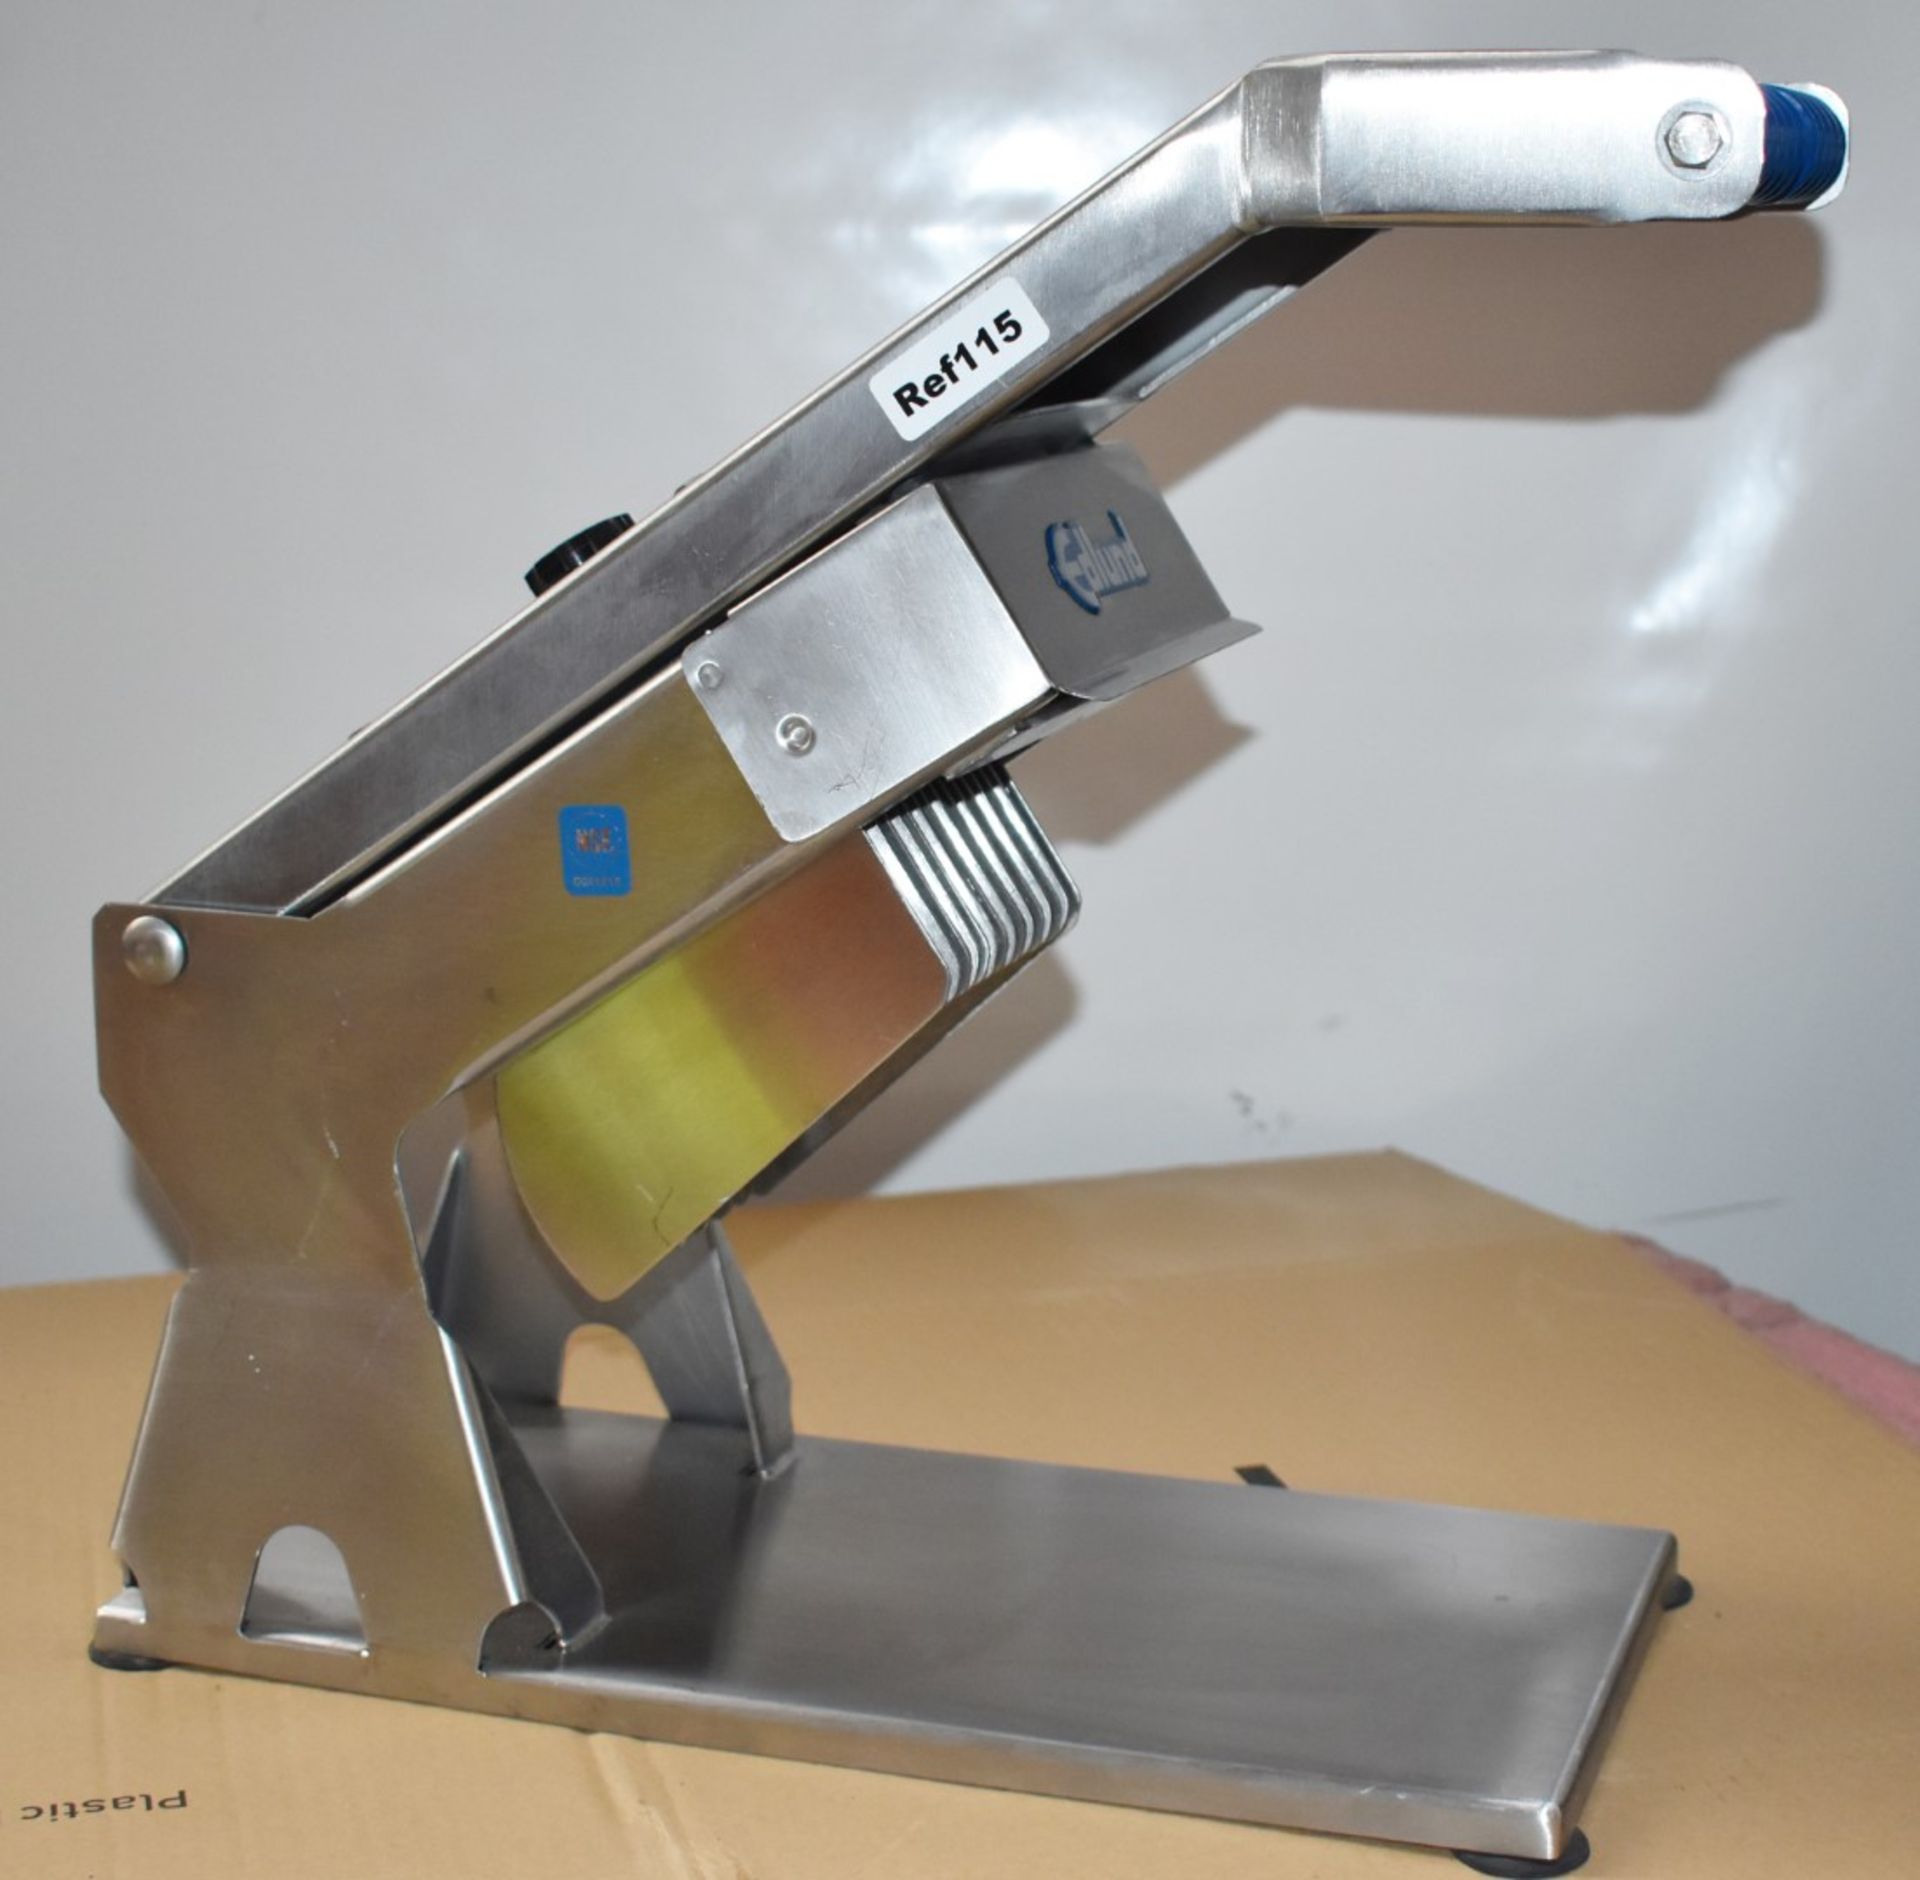 1 x Edlund XL-125 ARC Manual Fruit and Vegetable Slicer With Blades - CL232 - Ref115 - Location: